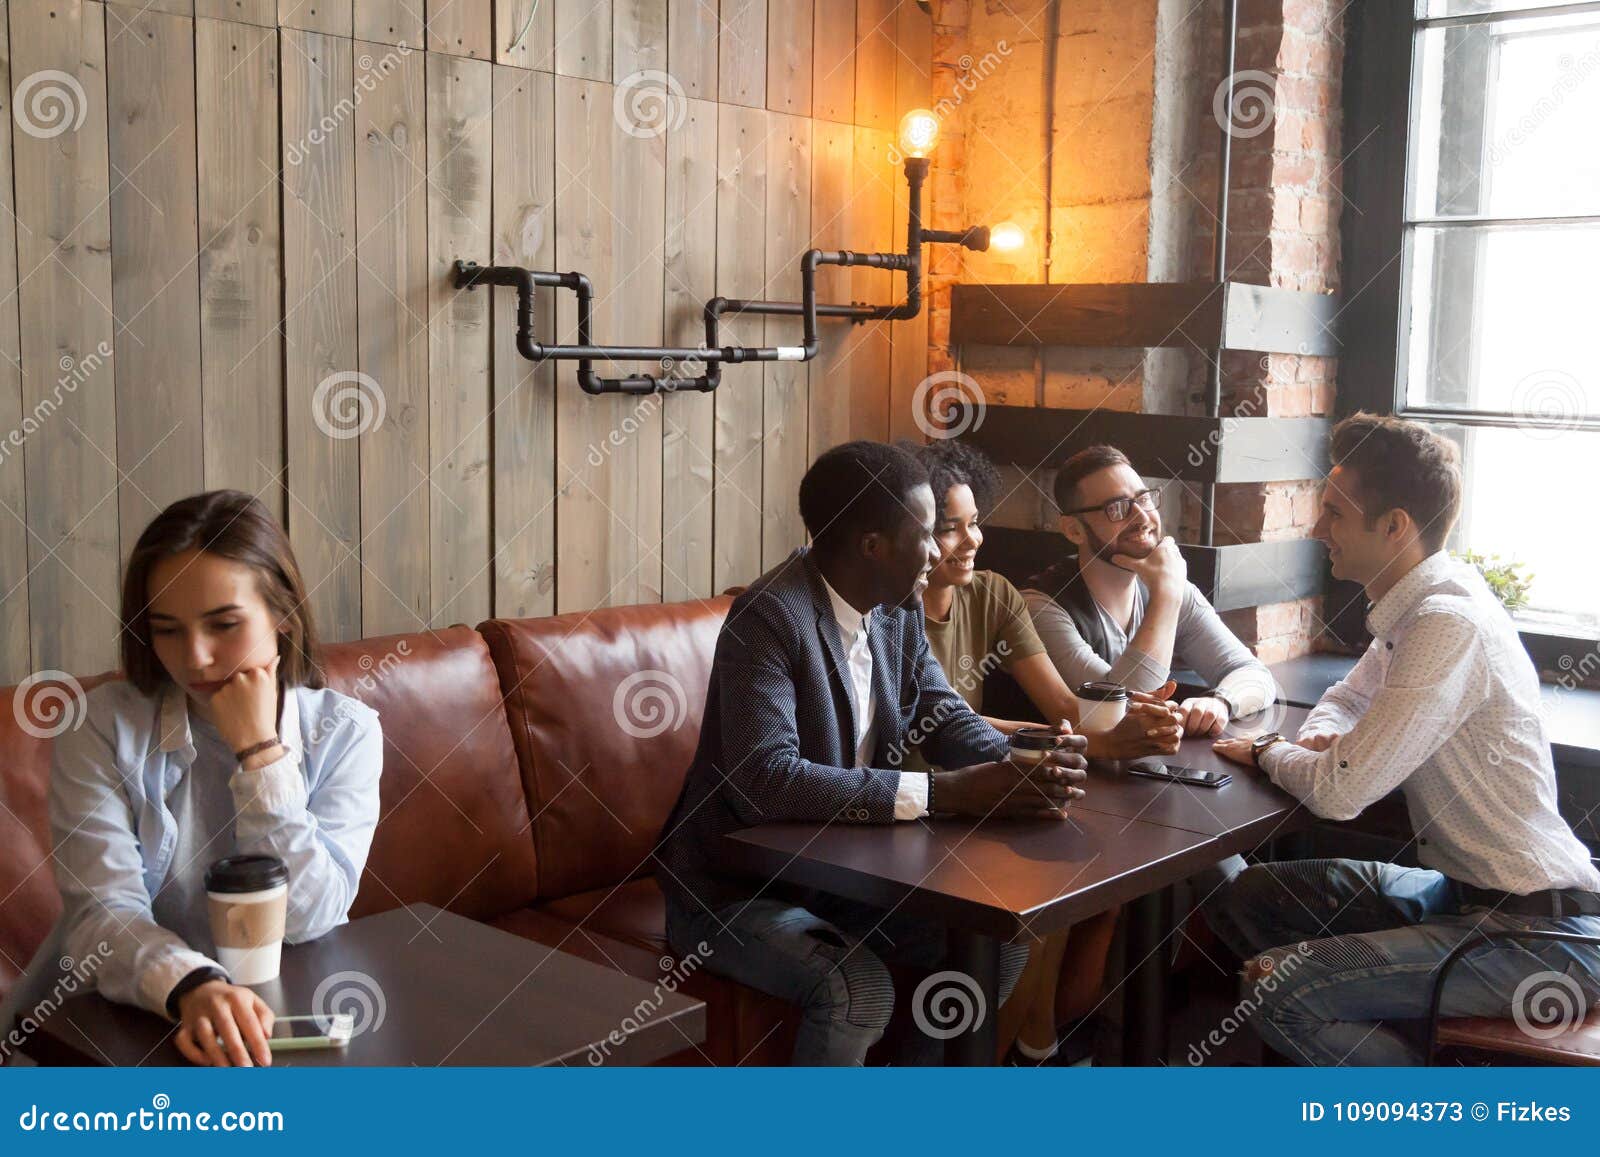 diverse young friends ignoring sad girl sitting alone in cafe